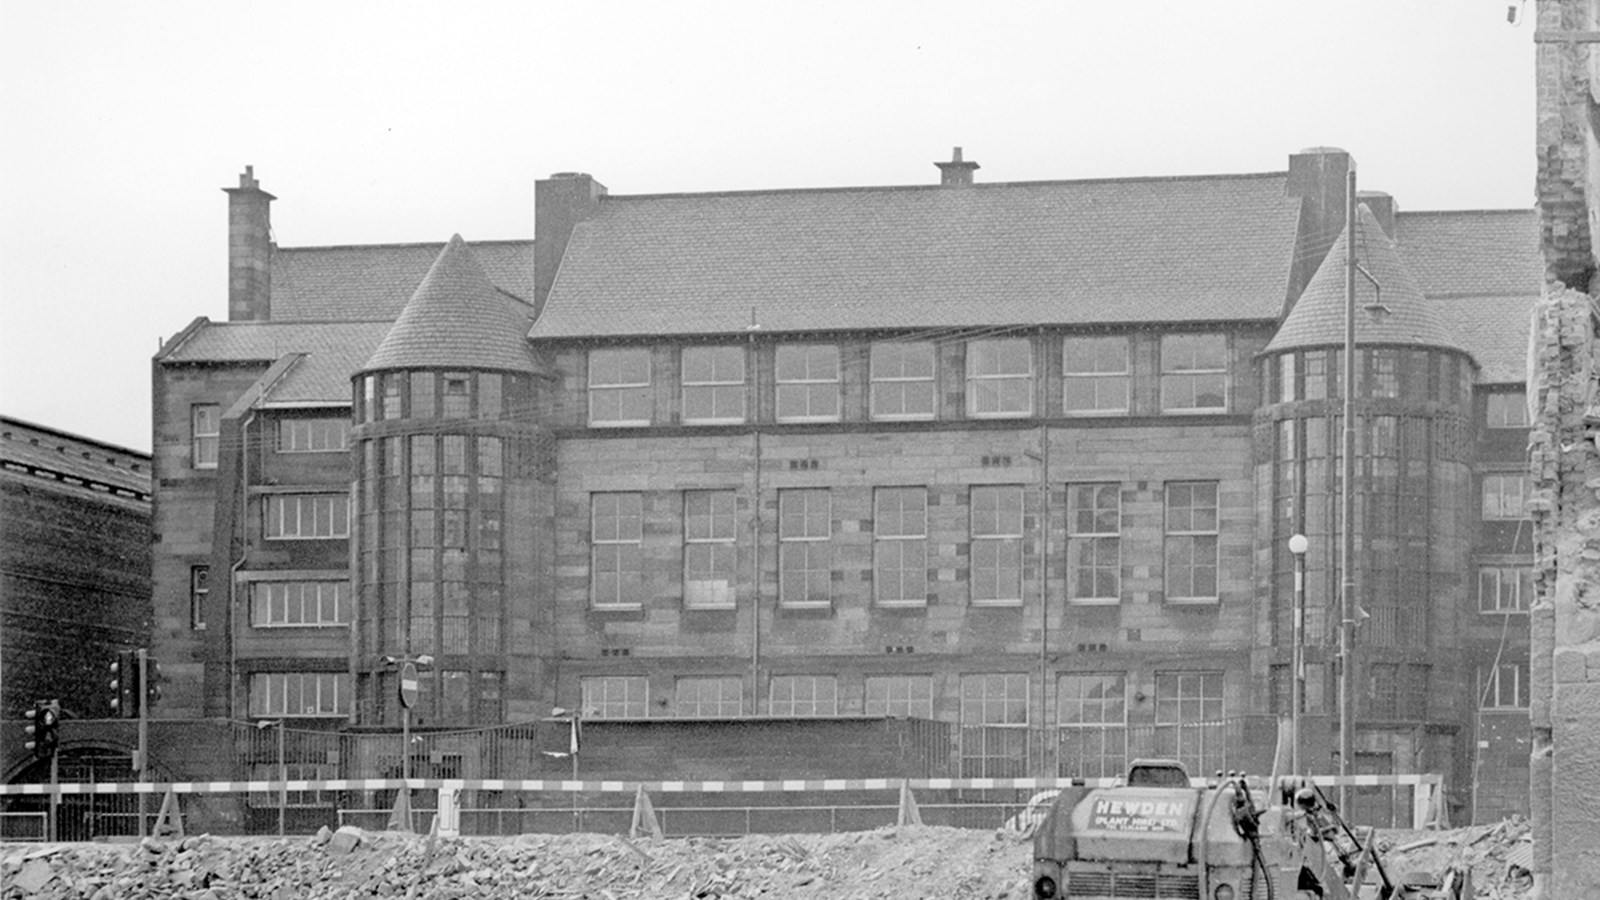 A school board building in black and white photography receiving development work outside, with a small digger and barriers in the foreground.